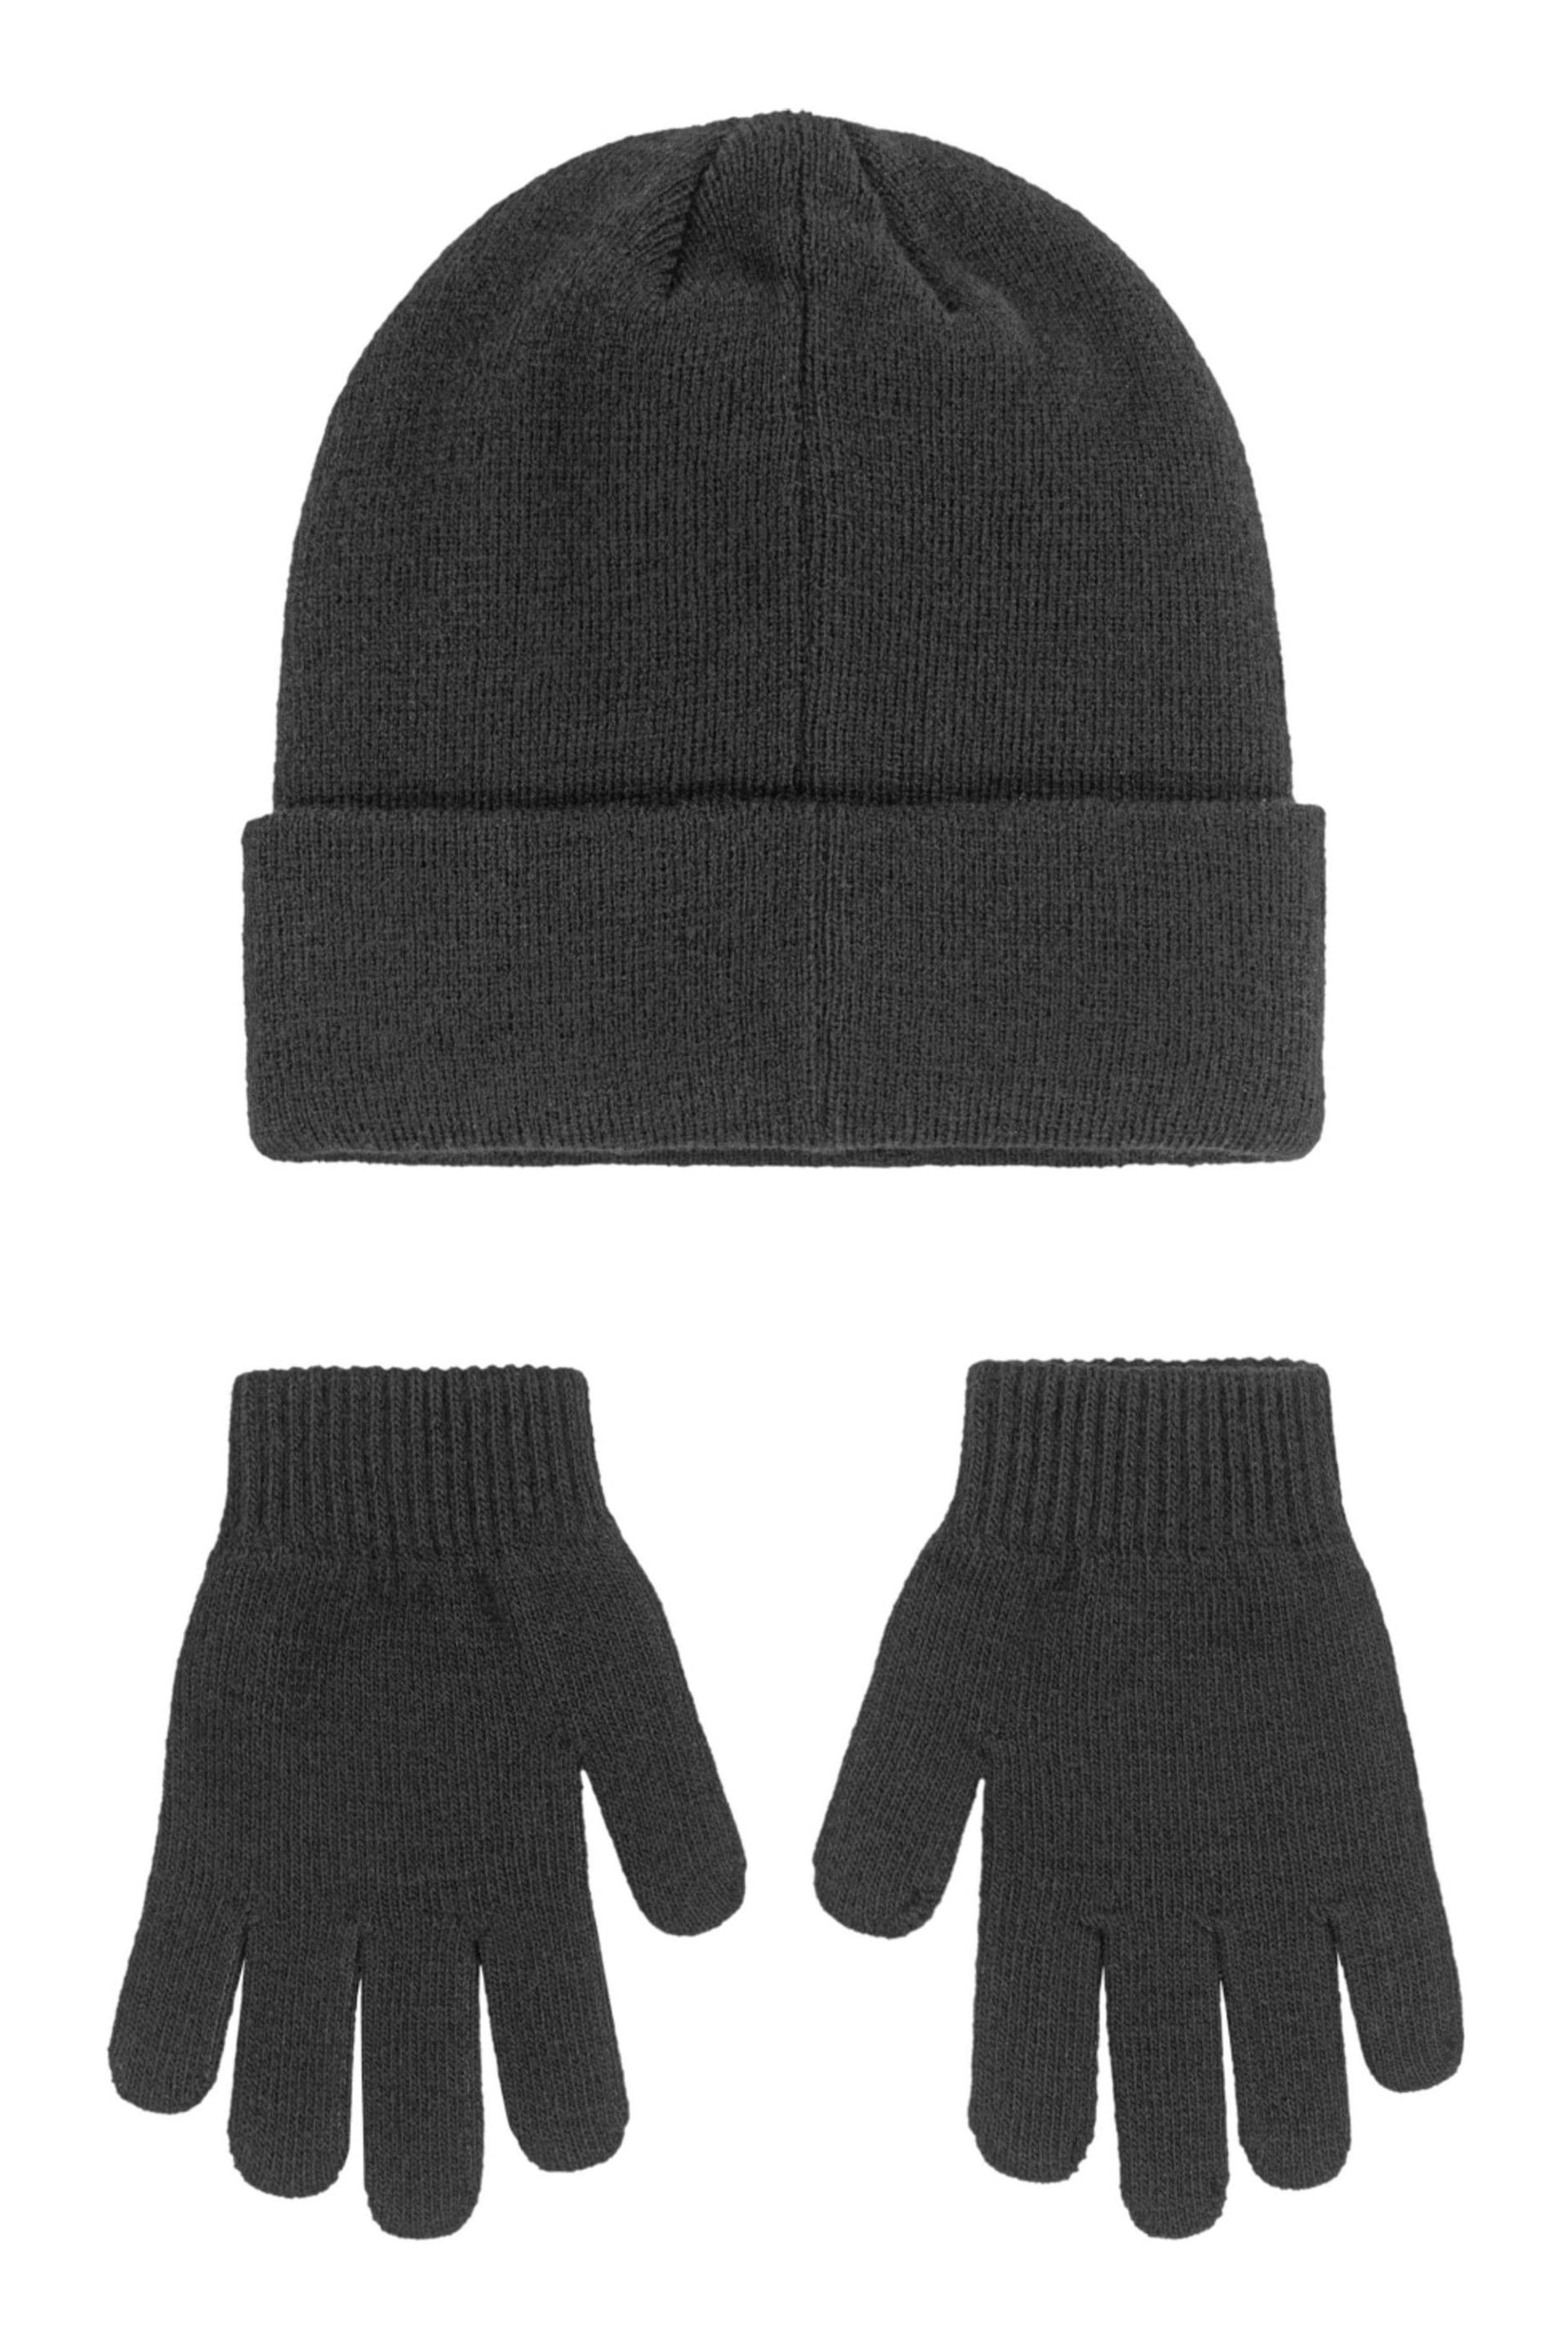 Nike Black Club Older Kids Knitted Beanie Hat and Gloves Set - Image 2 of 2